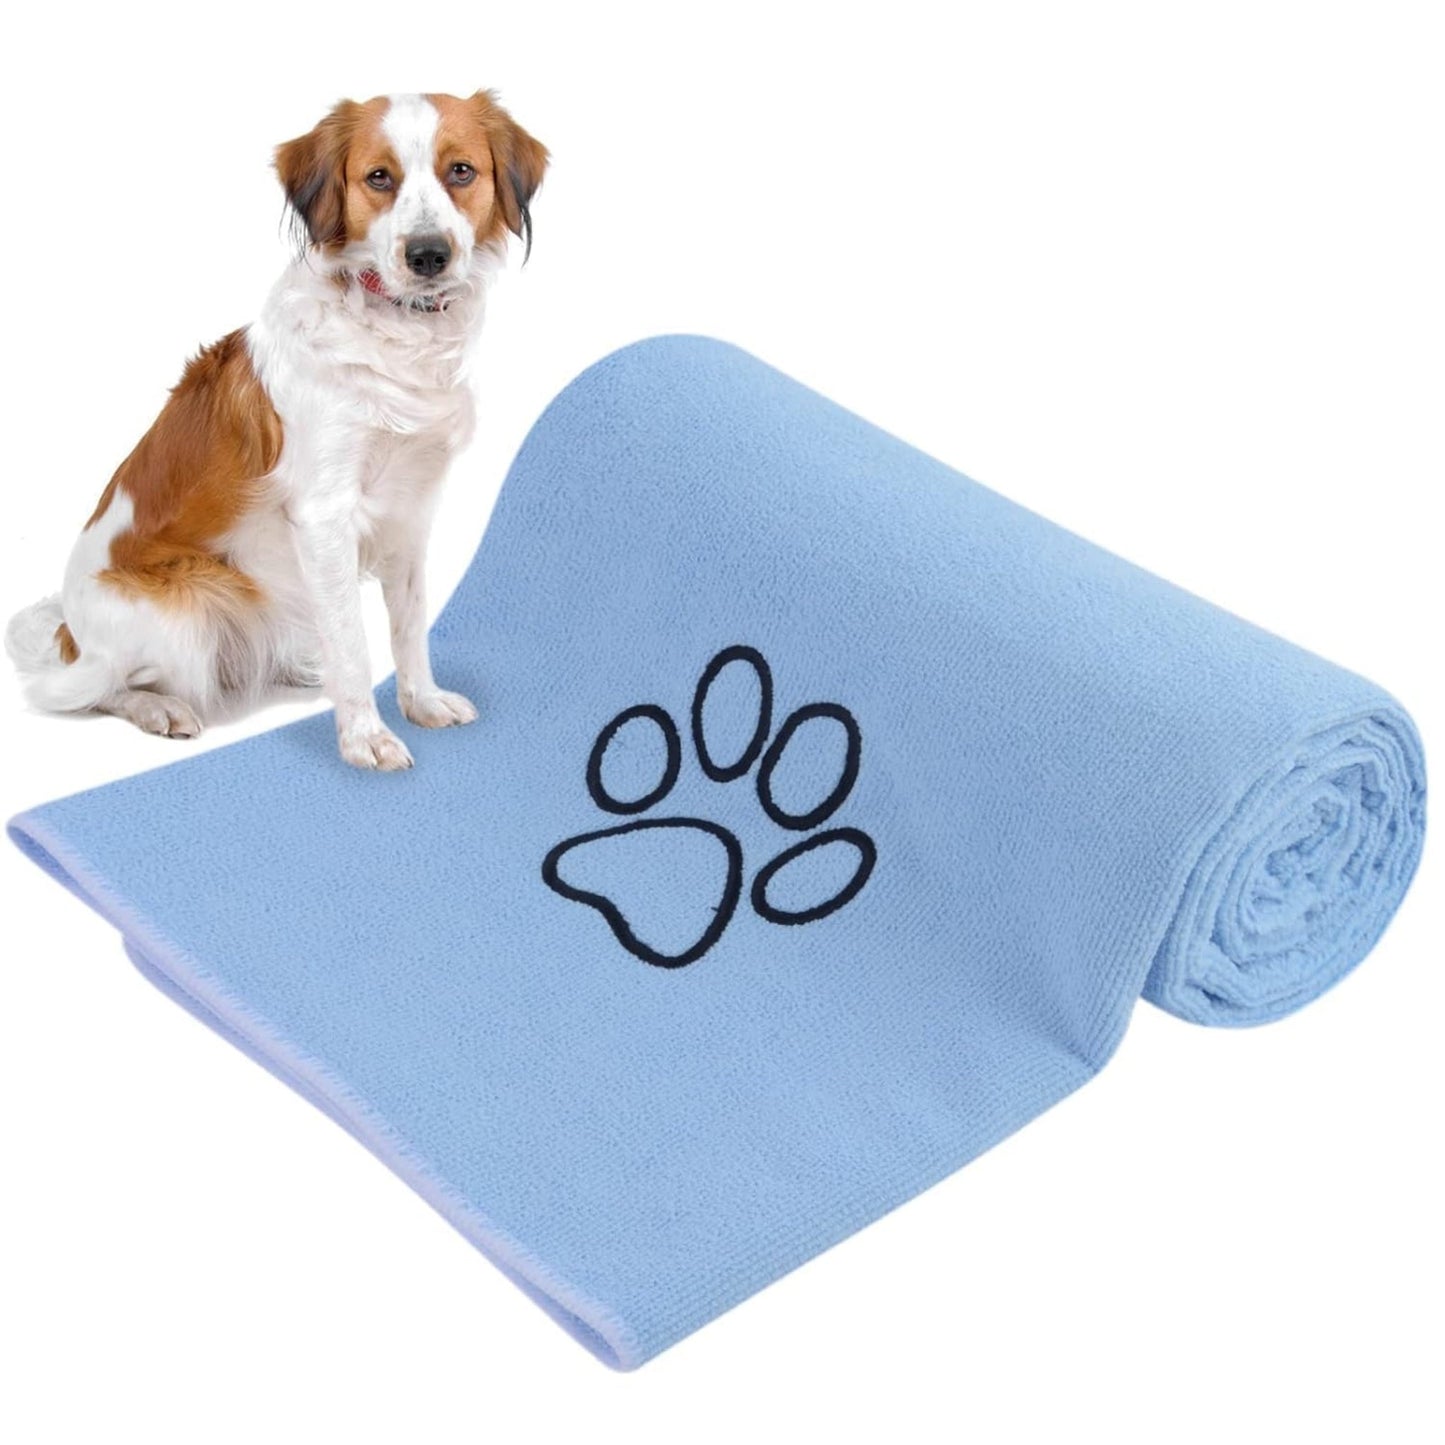 Foodie Puppies Dog Bathing Quick Drying Towel (60x115cm), Pack of 3